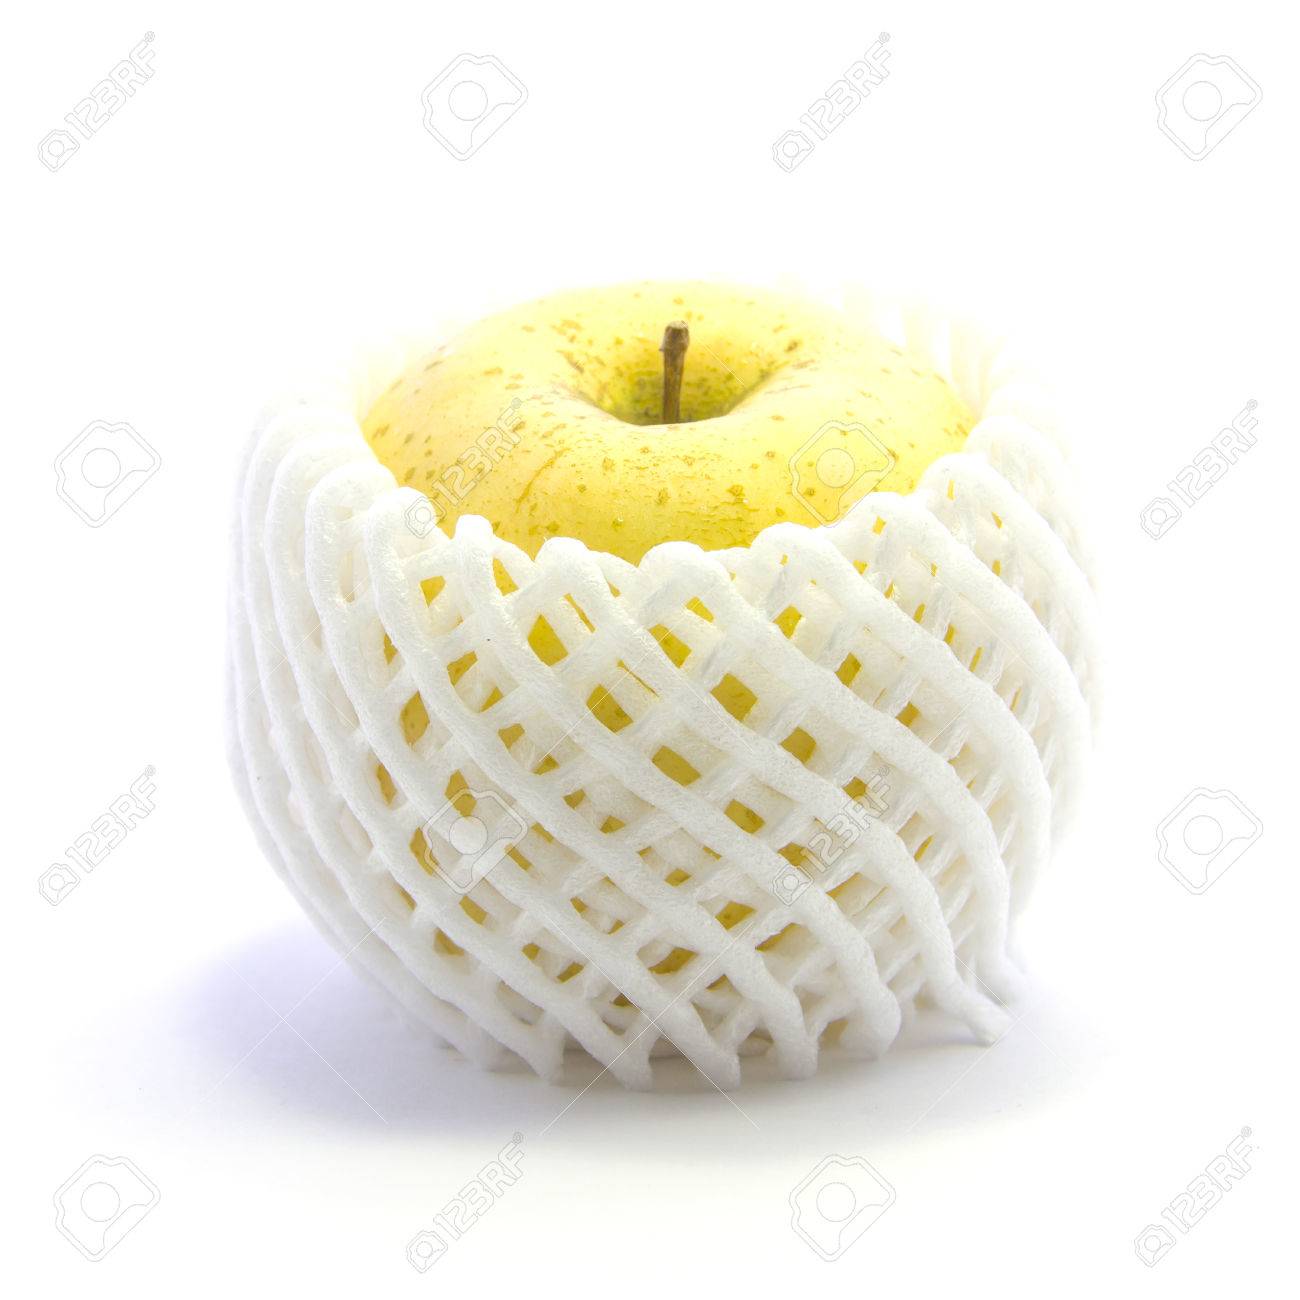 36431740-side-view-yellow-apple-with-foam-mesh-protected-cover.jpg